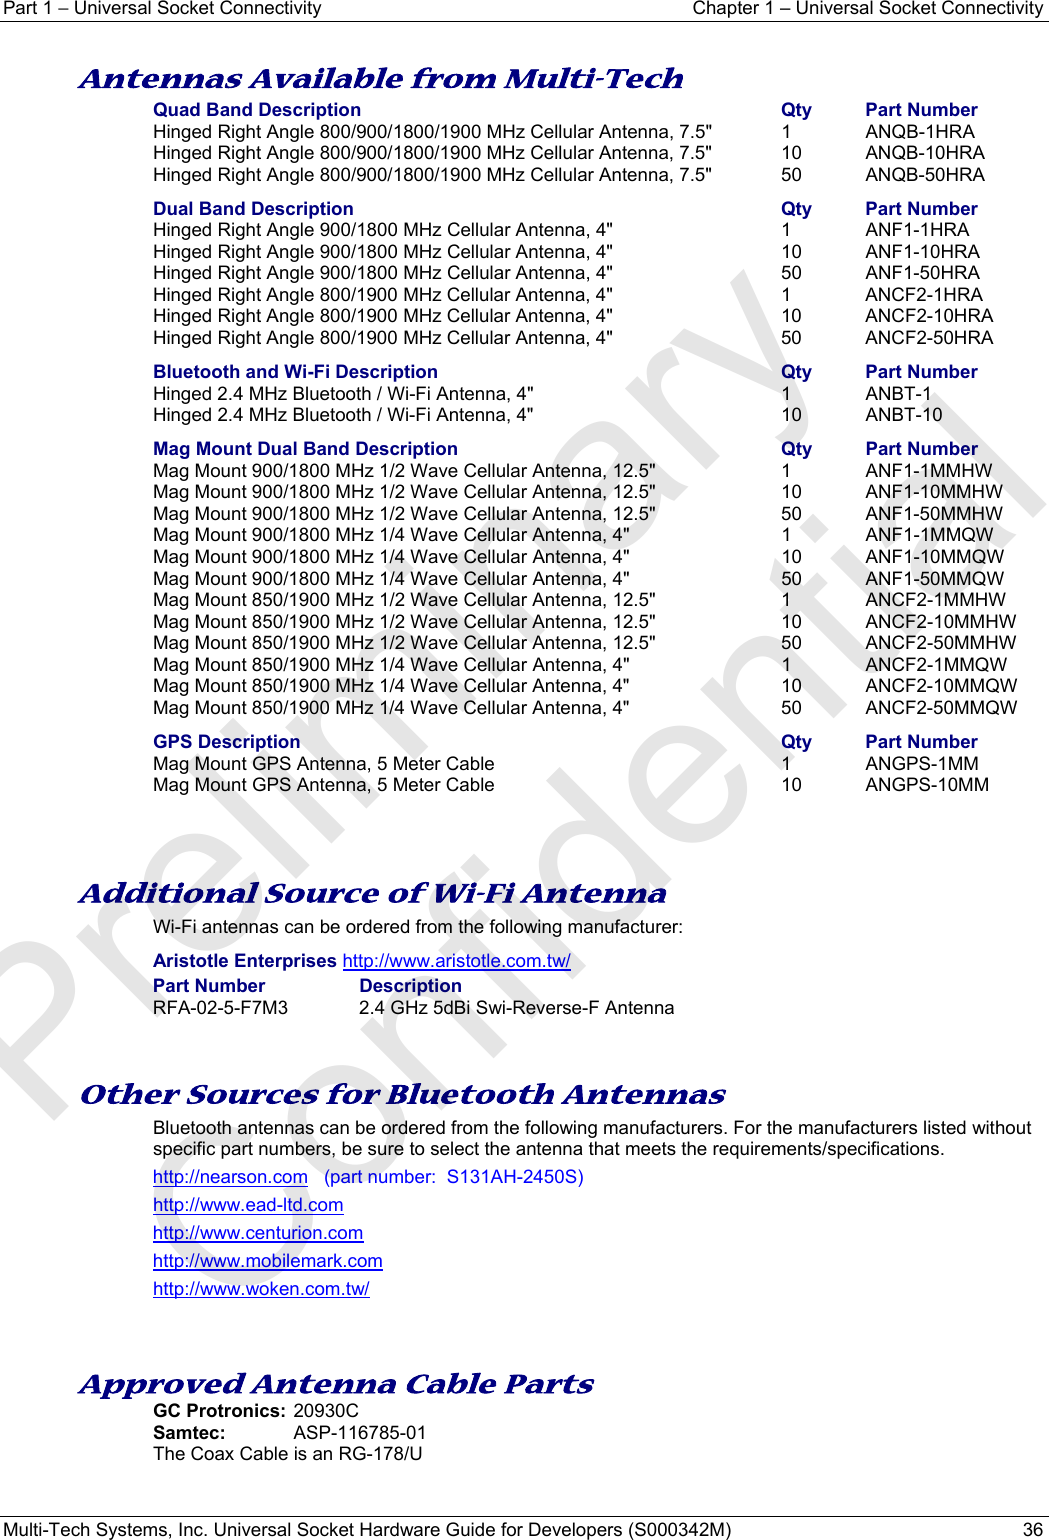 Part 1 − Universal Socket Connectivity  Chapter 1 – Universal Socket Connectivity Multi-Tech Systems, Inc. Universal Socket Hardware Guide for Developers (S000342M)  36   Antennas Available from Multi-Tech Quad Band Description  Qty  Part Number Hinged Right Angle 800/900/1800/1900 MHz Cellular Antenna, 7.5&quot;    1  ANQB-1HRA   Hinged Right Angle 800/900/1800/1900 MHz Cellular Antenna, 7.5&quot;  10  ANQB-10HRA Hinged Right Angle 800/900/1800/1900 MHz Cellular Antenna, 7.5&quot;  50  ANQB-50HRA Dual Band Description  Qty  Part Number Hinged Right Angle 900/1800 MHz Cellular Antenna, 4&quot;    1  ANF1-1HRA   Hinged Right Angle 900/1800 MHz Cellular Antenna, 4&quot;    10  ANF1-10HRA   Hinged Right Angle 900/1800 MHz Cellular Antenna, 4&quot;    50  ANF1-50HRA   Hinged Right Angle 800/1900 MHz Cellular Antenna, 4&quot;    1  ANCF2-1HRA Hinged Right Angle 800/1900 MHz Cellular Antenna, 4&quot;    10  ANCF2-10HRA Hinged Right Angle 800/1900 MHz Cellular Antenna, 4&quot;    50  ANCF2-50HRA Bluetooth and Wi-Fi Description  Qty  Part Number Hinged 2.4 MHz Bluetooth / Wi-Fi Antenna, 4&quot;  1  ANBT-1 Hinged 2.4 MHz Bluetooth / Wi-Fi Antenna, 4&quot;  10  ANBT-10 Mag Mount Dual Band Description  Qty  Part Number Mag Mount 900/1800 MHz 1/2 Wave Cellular Antenna, 12.5&quot;  1  ANF1-1MMHW Mag Mount 900/1800 MHz 1/2 Wave Cellular Antenna, 12.5&quot;  10  ANF1-10MMHW Mag Mount 900/1800 MHz 1/2 Wave Cellular Antenna, 12.5&quot;  50  ANF1-50MMHW Mag Mount 900/1800 MHz 1/4 Wave Cellular Antenna, 4&quot;  1  ANF1-1MMQW Mag Mount 900/1800 MHz 1/4 Wave Cellular Antenna, 4&quot;  10  ANF1-10MMQW Mag Mount 900/1800 MHz 1/4 Wave Cellular Antenna, 4&quot;  50  ANF1-50MMQW Mag Mount 850/1900 MHz 1/2 Wave Cellular Antenna, 12.5&quot;  1  ANCF2-1MMHW Mag Mount 850/1900 MHz 1/2 Wave Cellular Antenna, 12.5&quot;  10  ANCF2-10MMHW Mag Mount 850/1900 MHz 1/2 Wave Cellular Antenna, 12.5&quot;  50  ANCF2-50MMHW Mag Mount 850/1900 MHz 1/4 Wave Cellular Antenna, 4&quot;  1  ANCF2-1MMQW Mag Mount 850/1900 MHz 1/4 Wave Cellular Antenna, 4&quot;  10  ANCF2-10MMQW Mag Mount 850/1900 MHz 1/4 Wave Cellular Antenna, 4&quot;  50  ANCF2-50MMQW GPS Description  Qty  Part Number Mag Mount GPS Antenna, 5 Meter Cable  1  ANGPS-1MM Mag Mount GPS Antenna, 5 Meter Cable  10  ANGPS-10MM    Additional Source of Wi-Fi Antenna  Wi-Fi antennas can be ordered from the following manufacturer:  Aristotle Enterprises http://www.aristotle.com.tw/ Part Number  Description RFA-02-5-F7M3  2.4 GHz 5dBi Swi-Reverse-F Antenna   Other Sources for Bluetooth Antennas Bluetooth antennas can be ordered from the following manufacturers. For the manufacturers listed without specific part numbers, be sure to select the antenna that meets the requirements/specifications.  http://nearson.com   (part number:  S131AH-2450S)  http://www.ead-ltd.com http://www.centurion.com http://www.mobilemark.com http://www.woken.com.tw/    Approved Antenna Cable Parts GC Protronics: 20930C Samtec: ASP-116785-01 The Coax Cable is an RG-178/U   Preliminary  Confidential